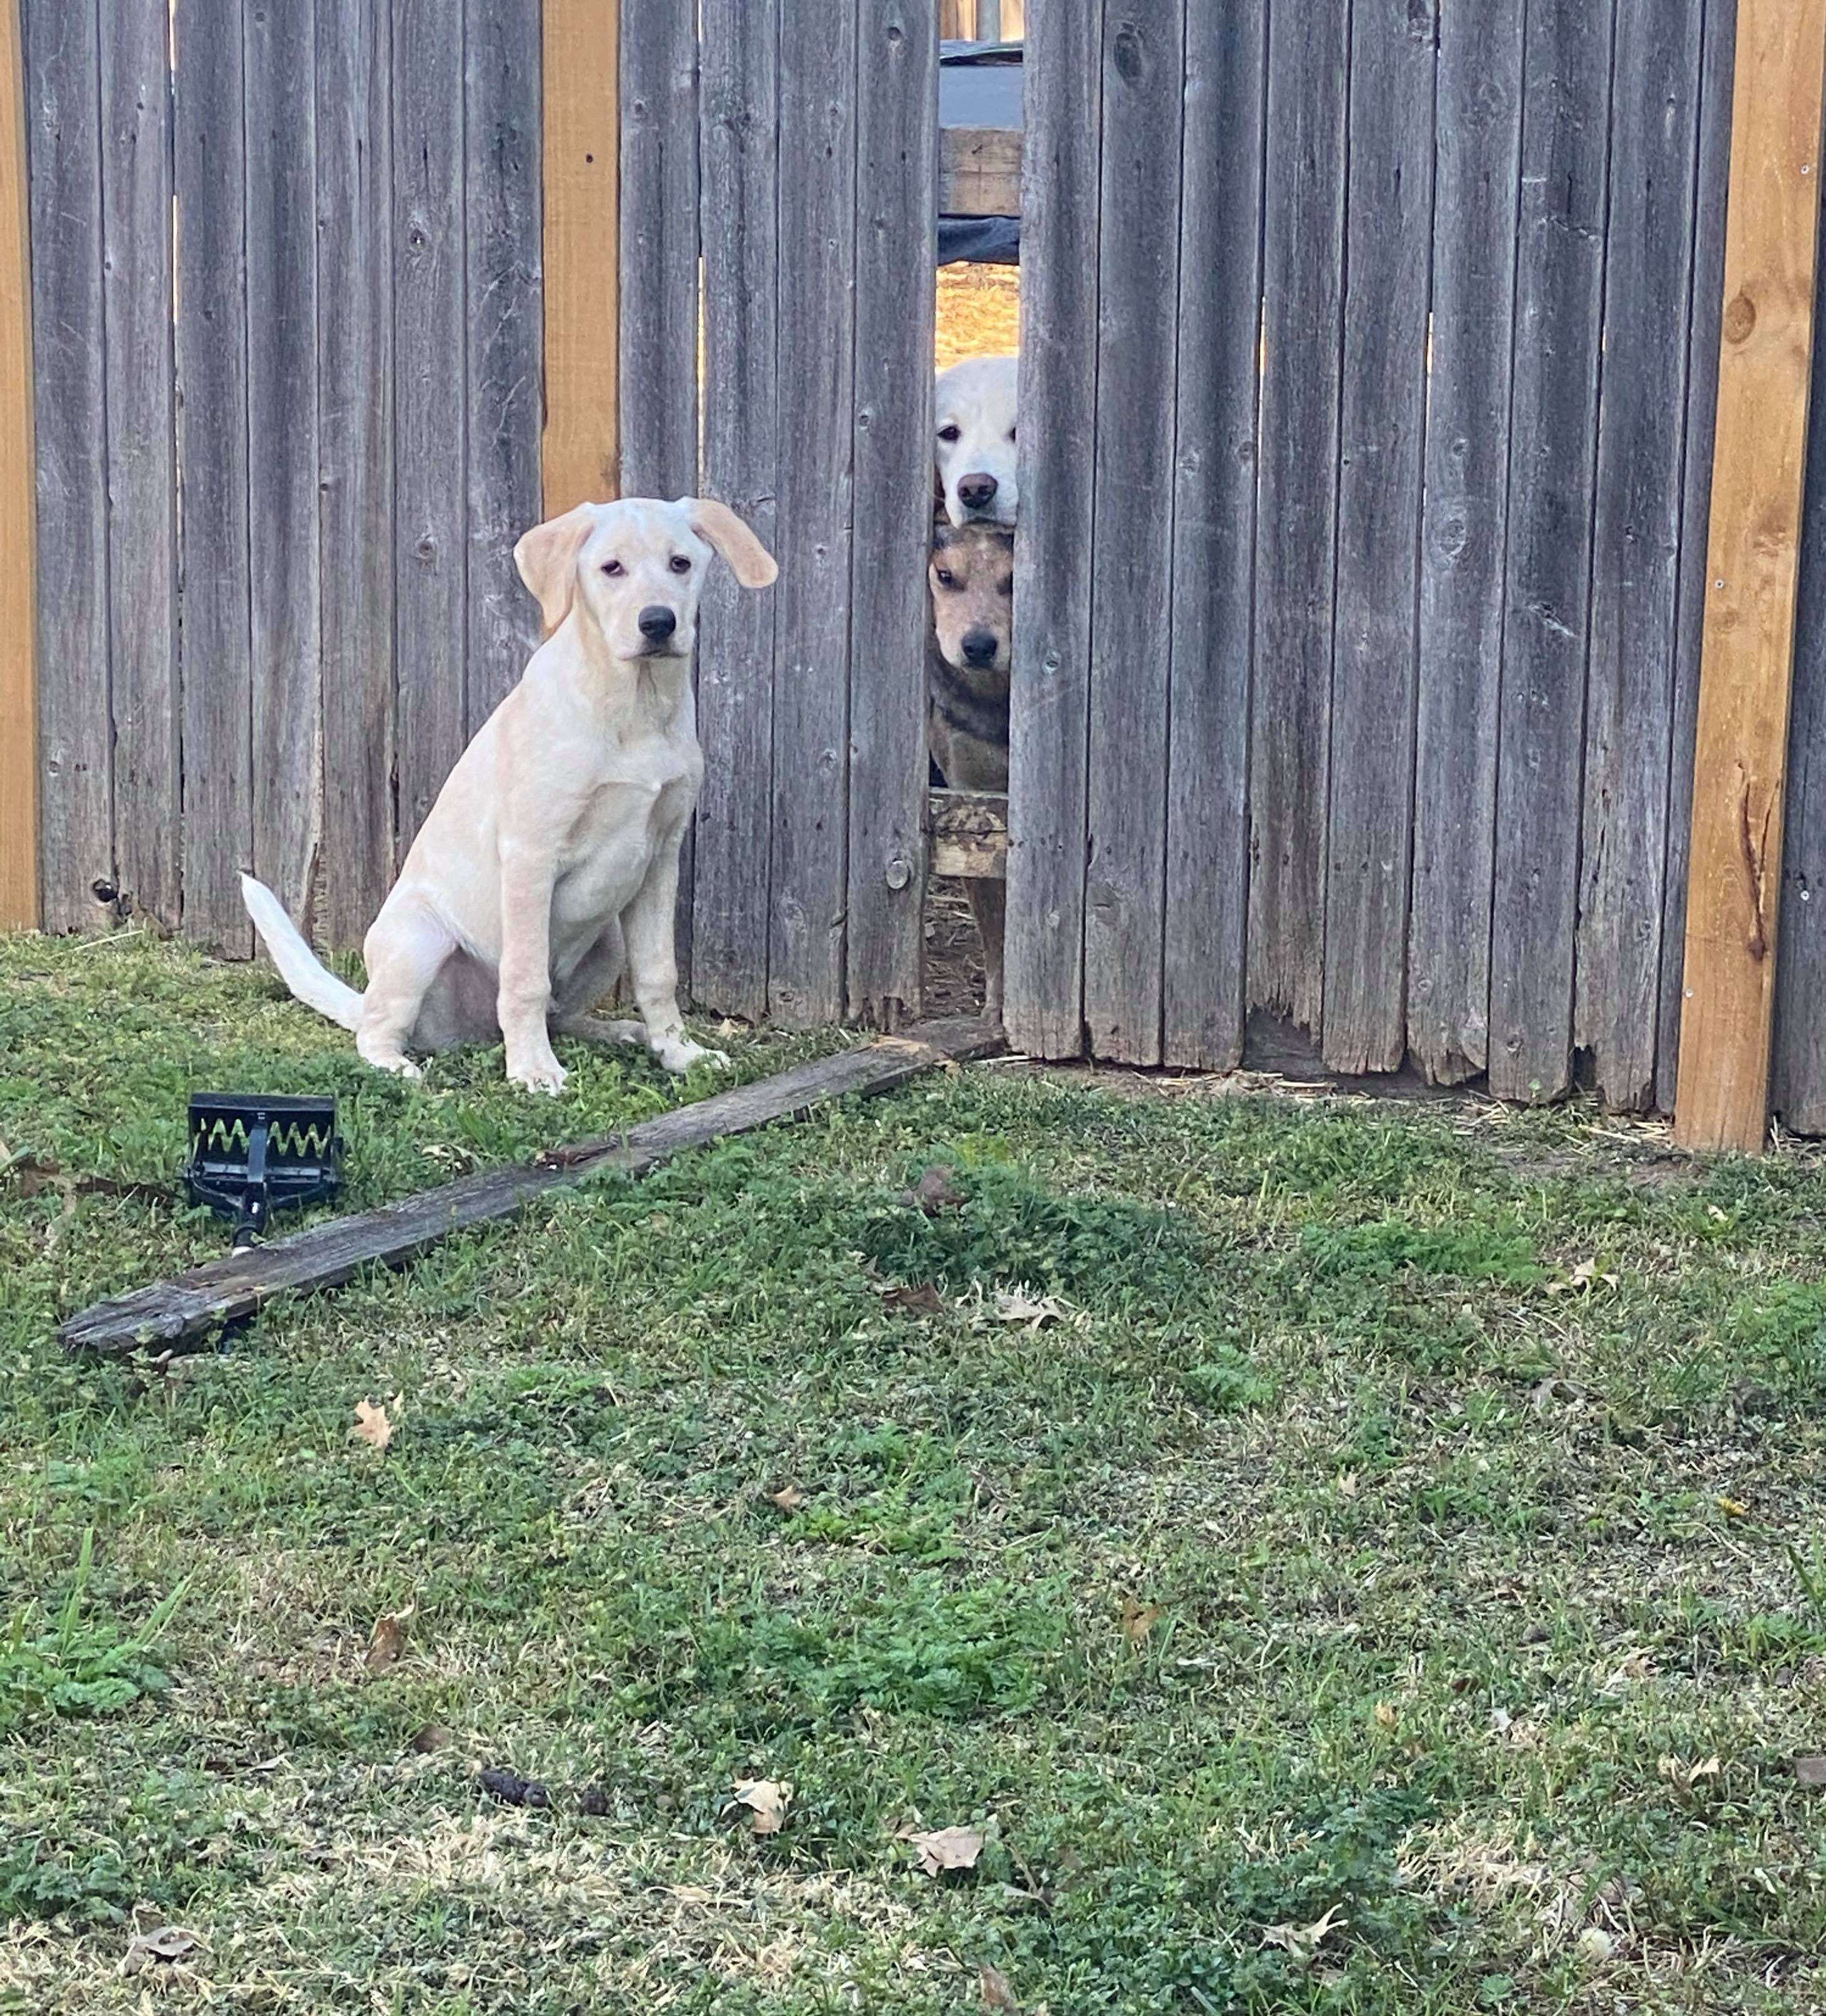 Dog tries to tear down fence to help his friends escape